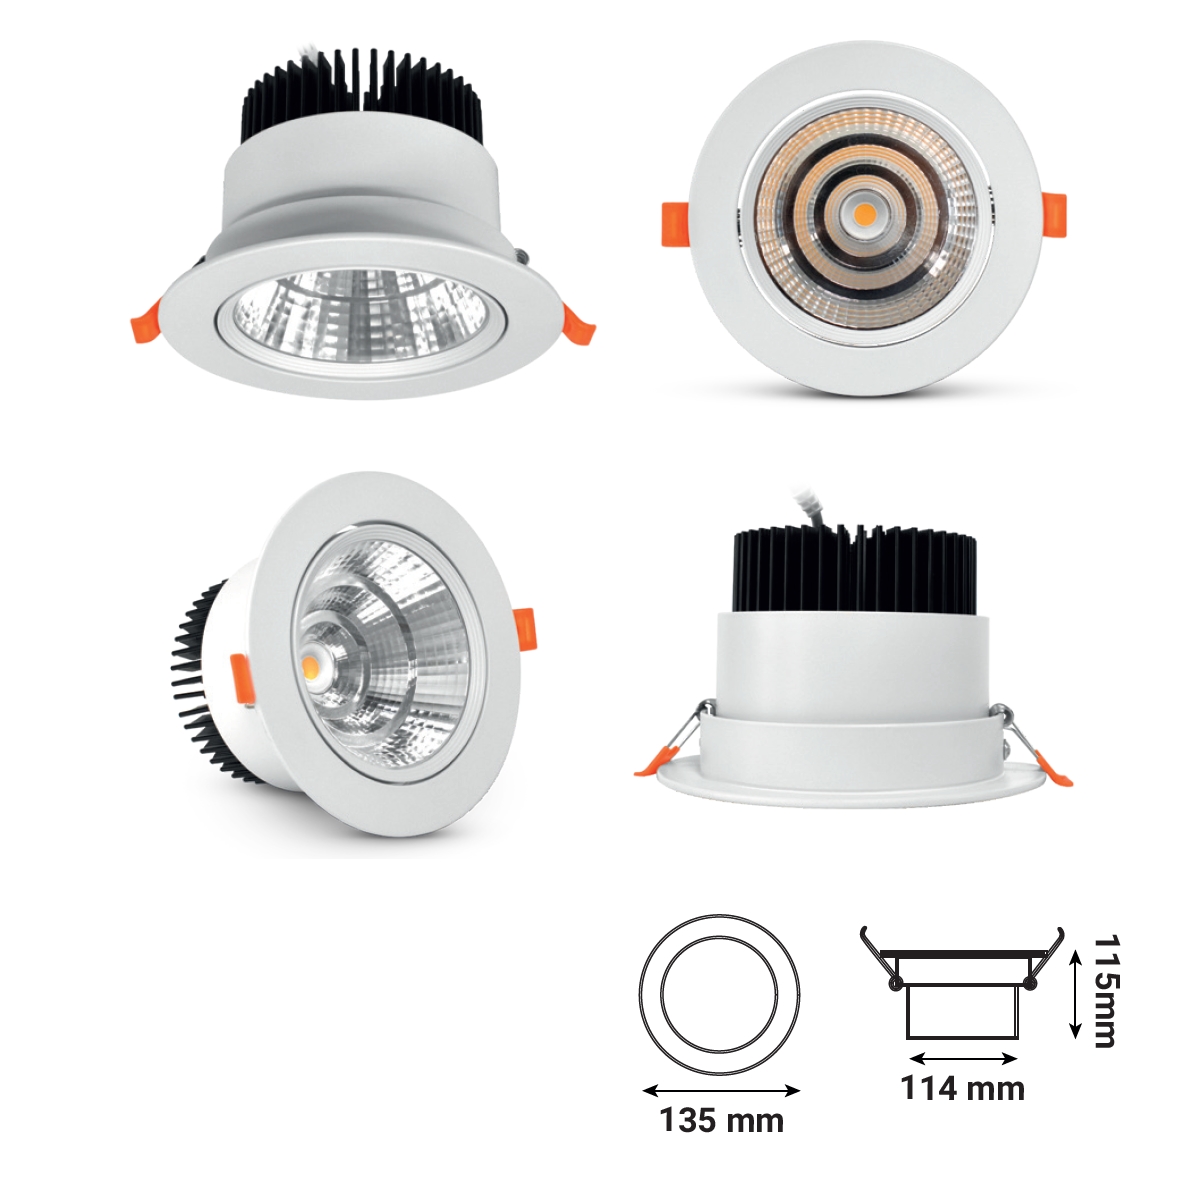 ALDOII-12W : Downlight LED rond inclinable Ø135mm 12W IRC90